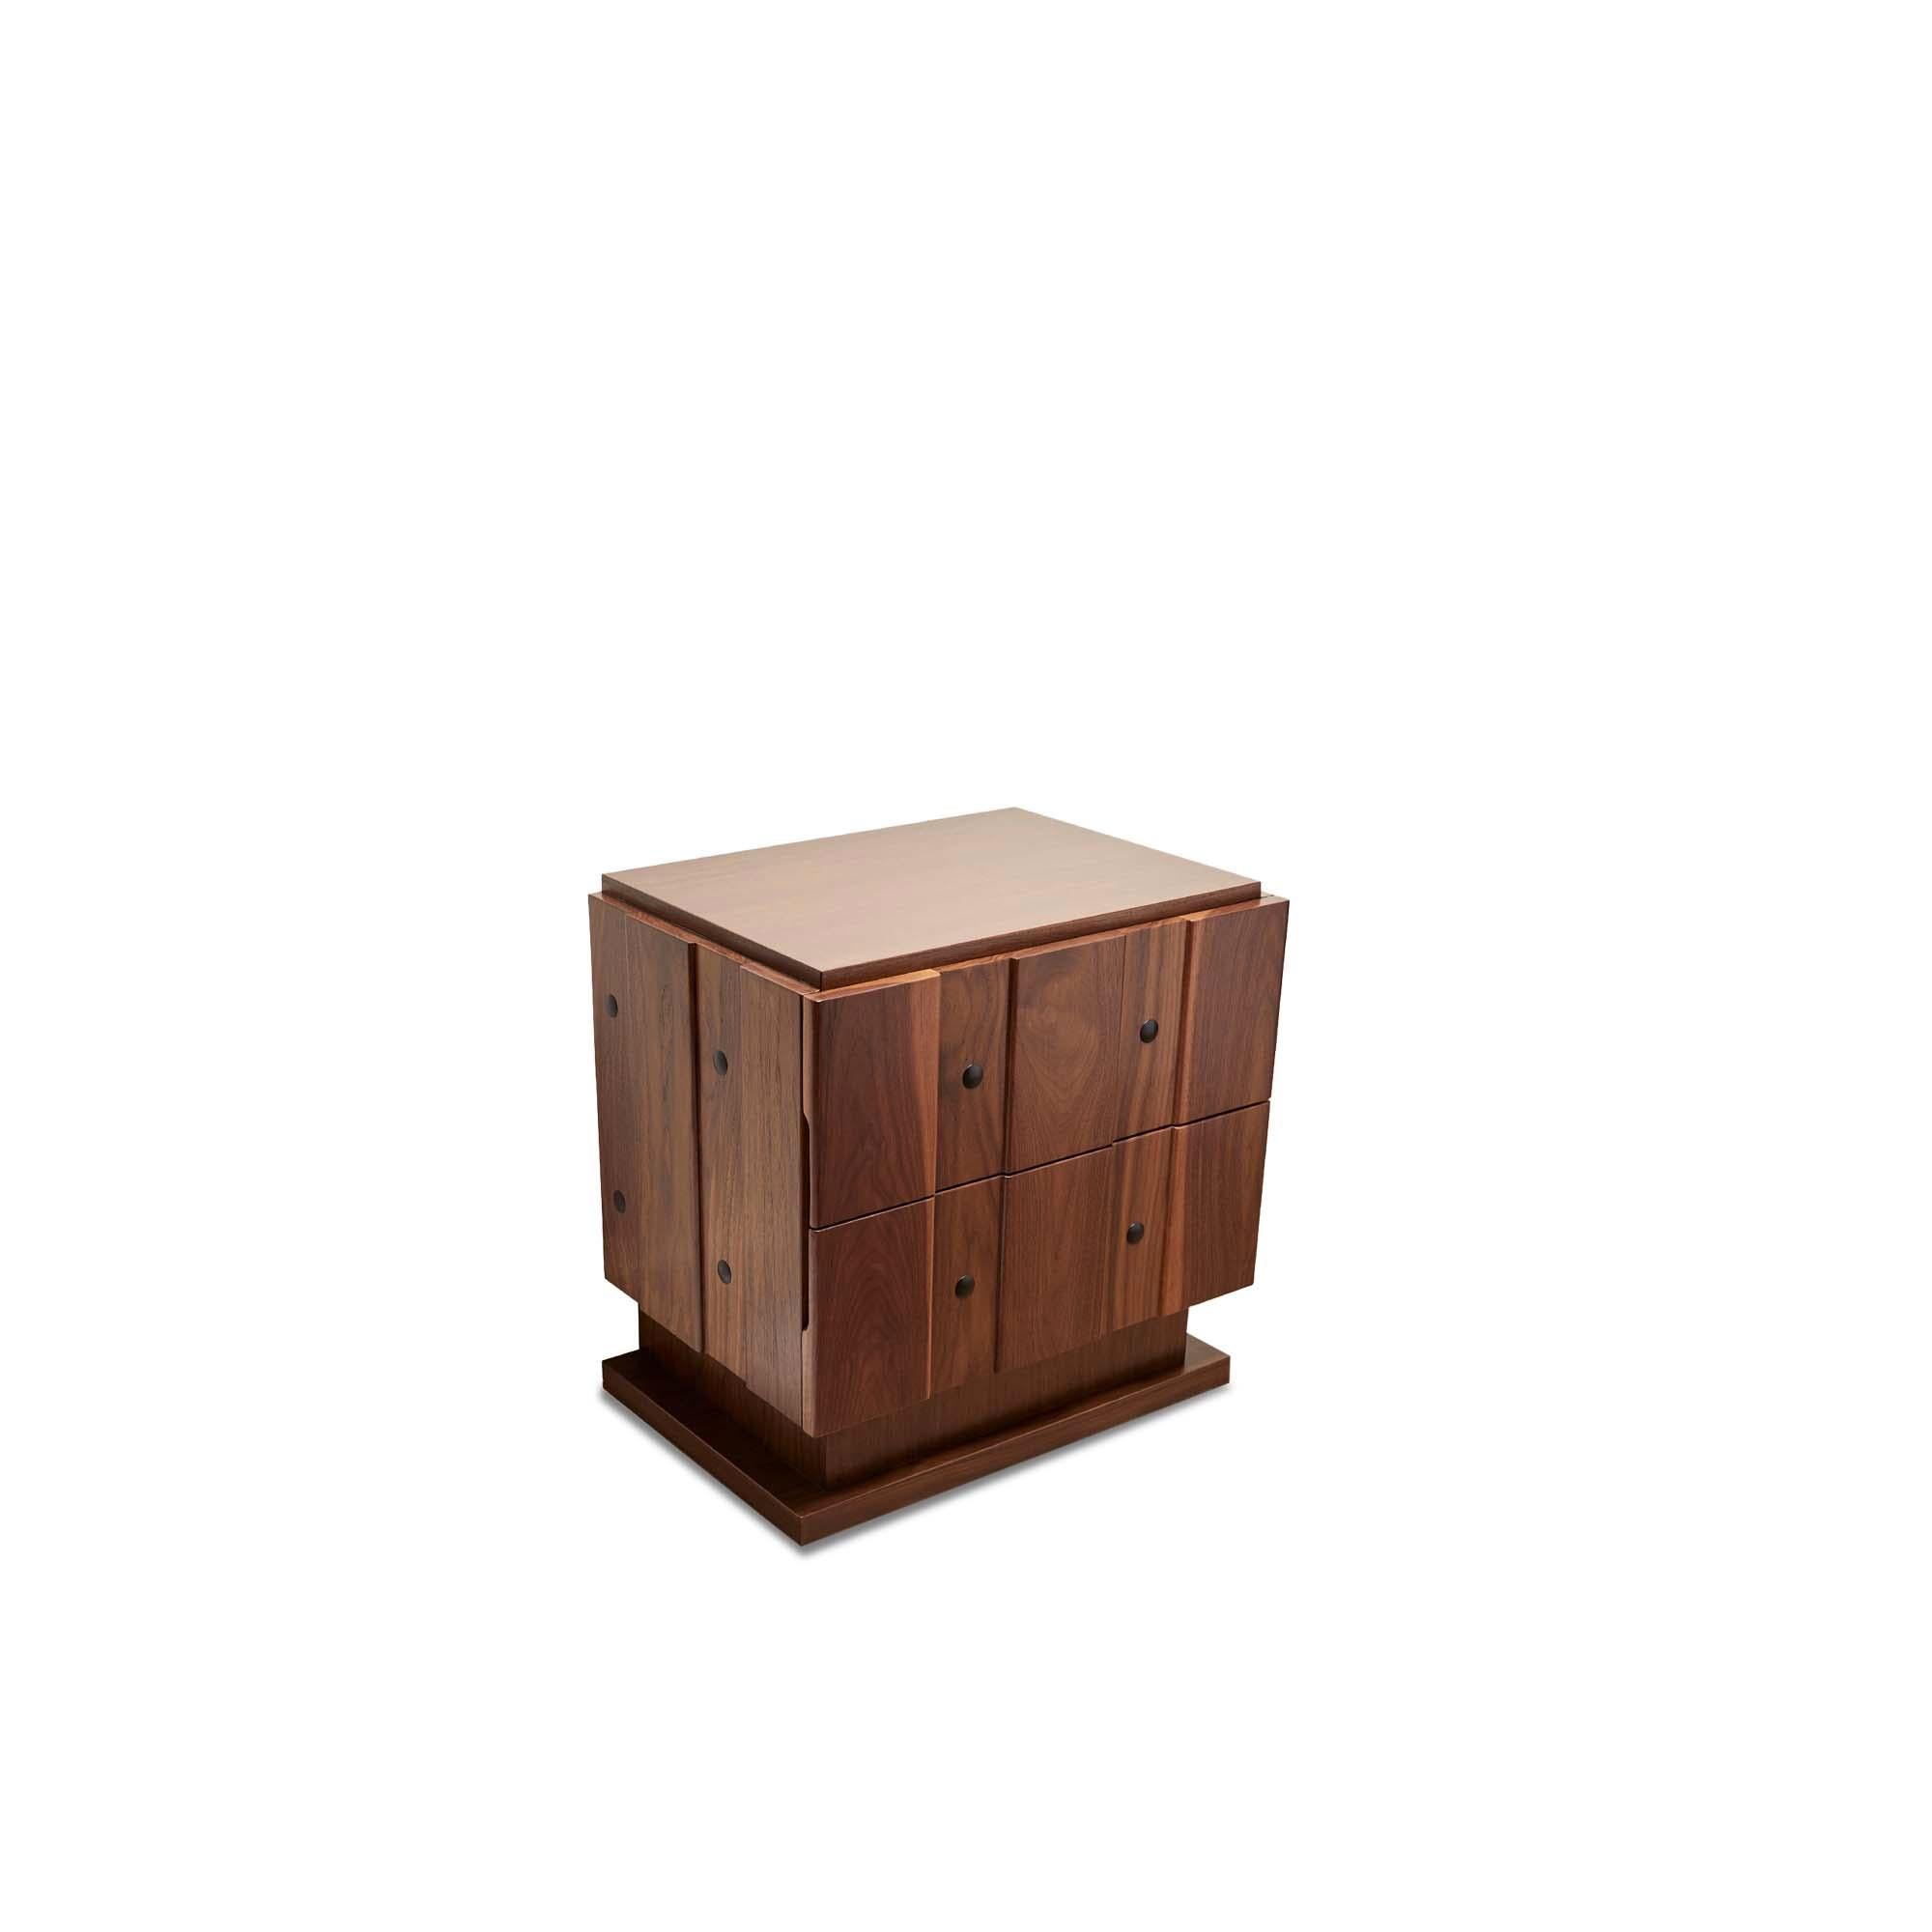 The Ojai Nightstand features board and batten doors with iron details and two drawers. Available in two sizes and in American walnut and white oak.

Inspired by the refined simplicity and subtle detailing of early 20th century Swedish furniture